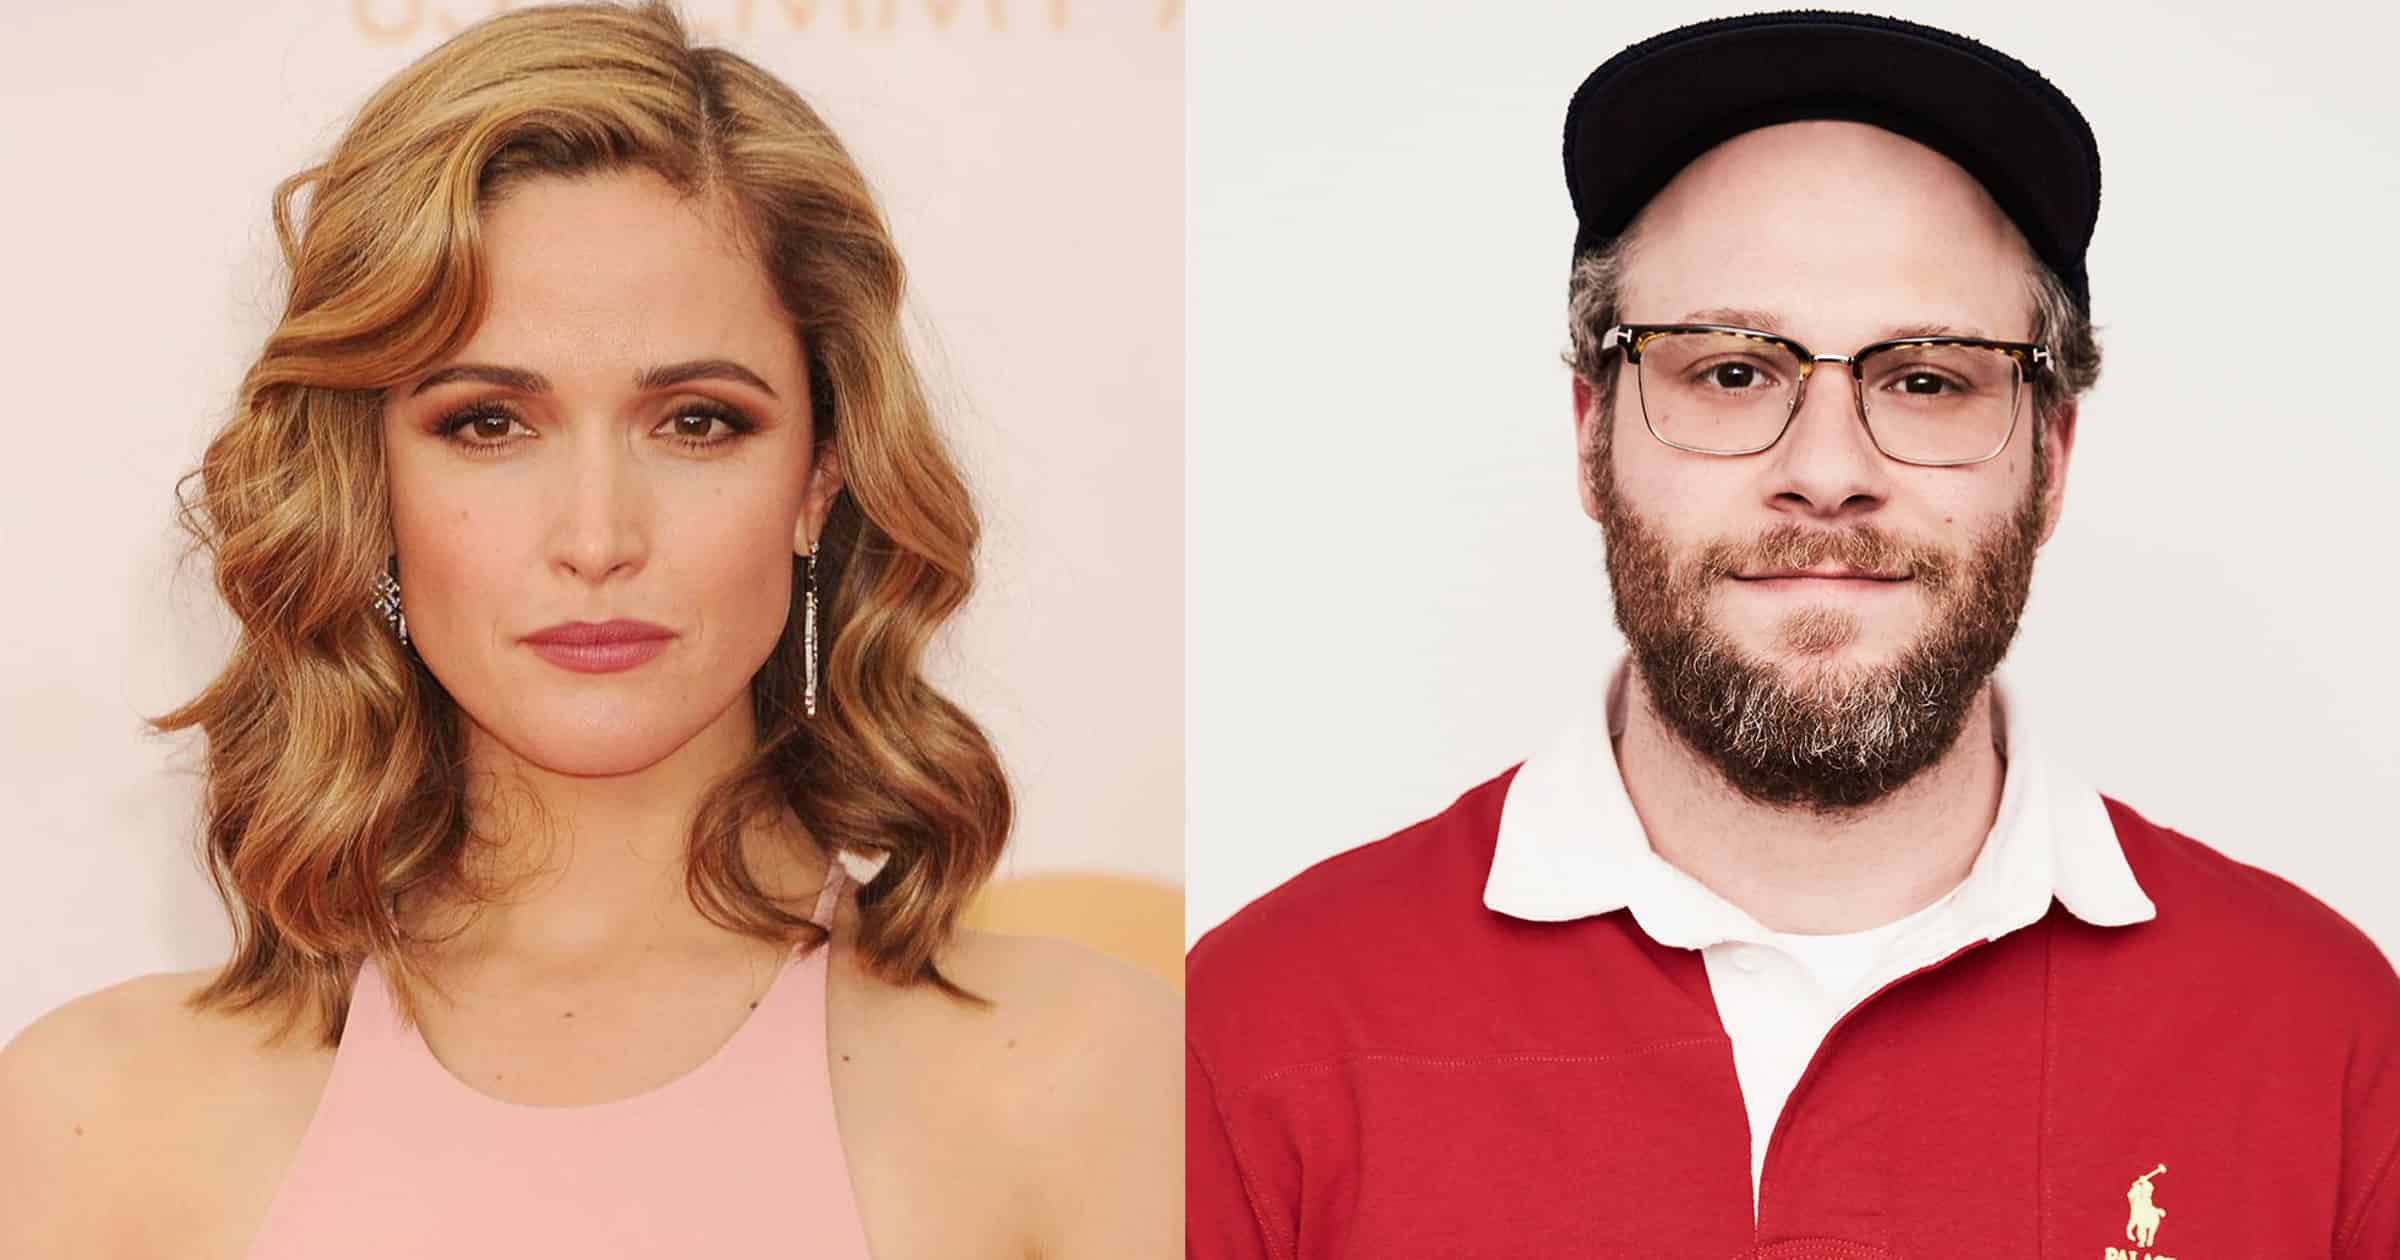 Comedy ‘Platonic,’ Starring Rose Byrne And Seth Rogen, Coming to Apple TV+